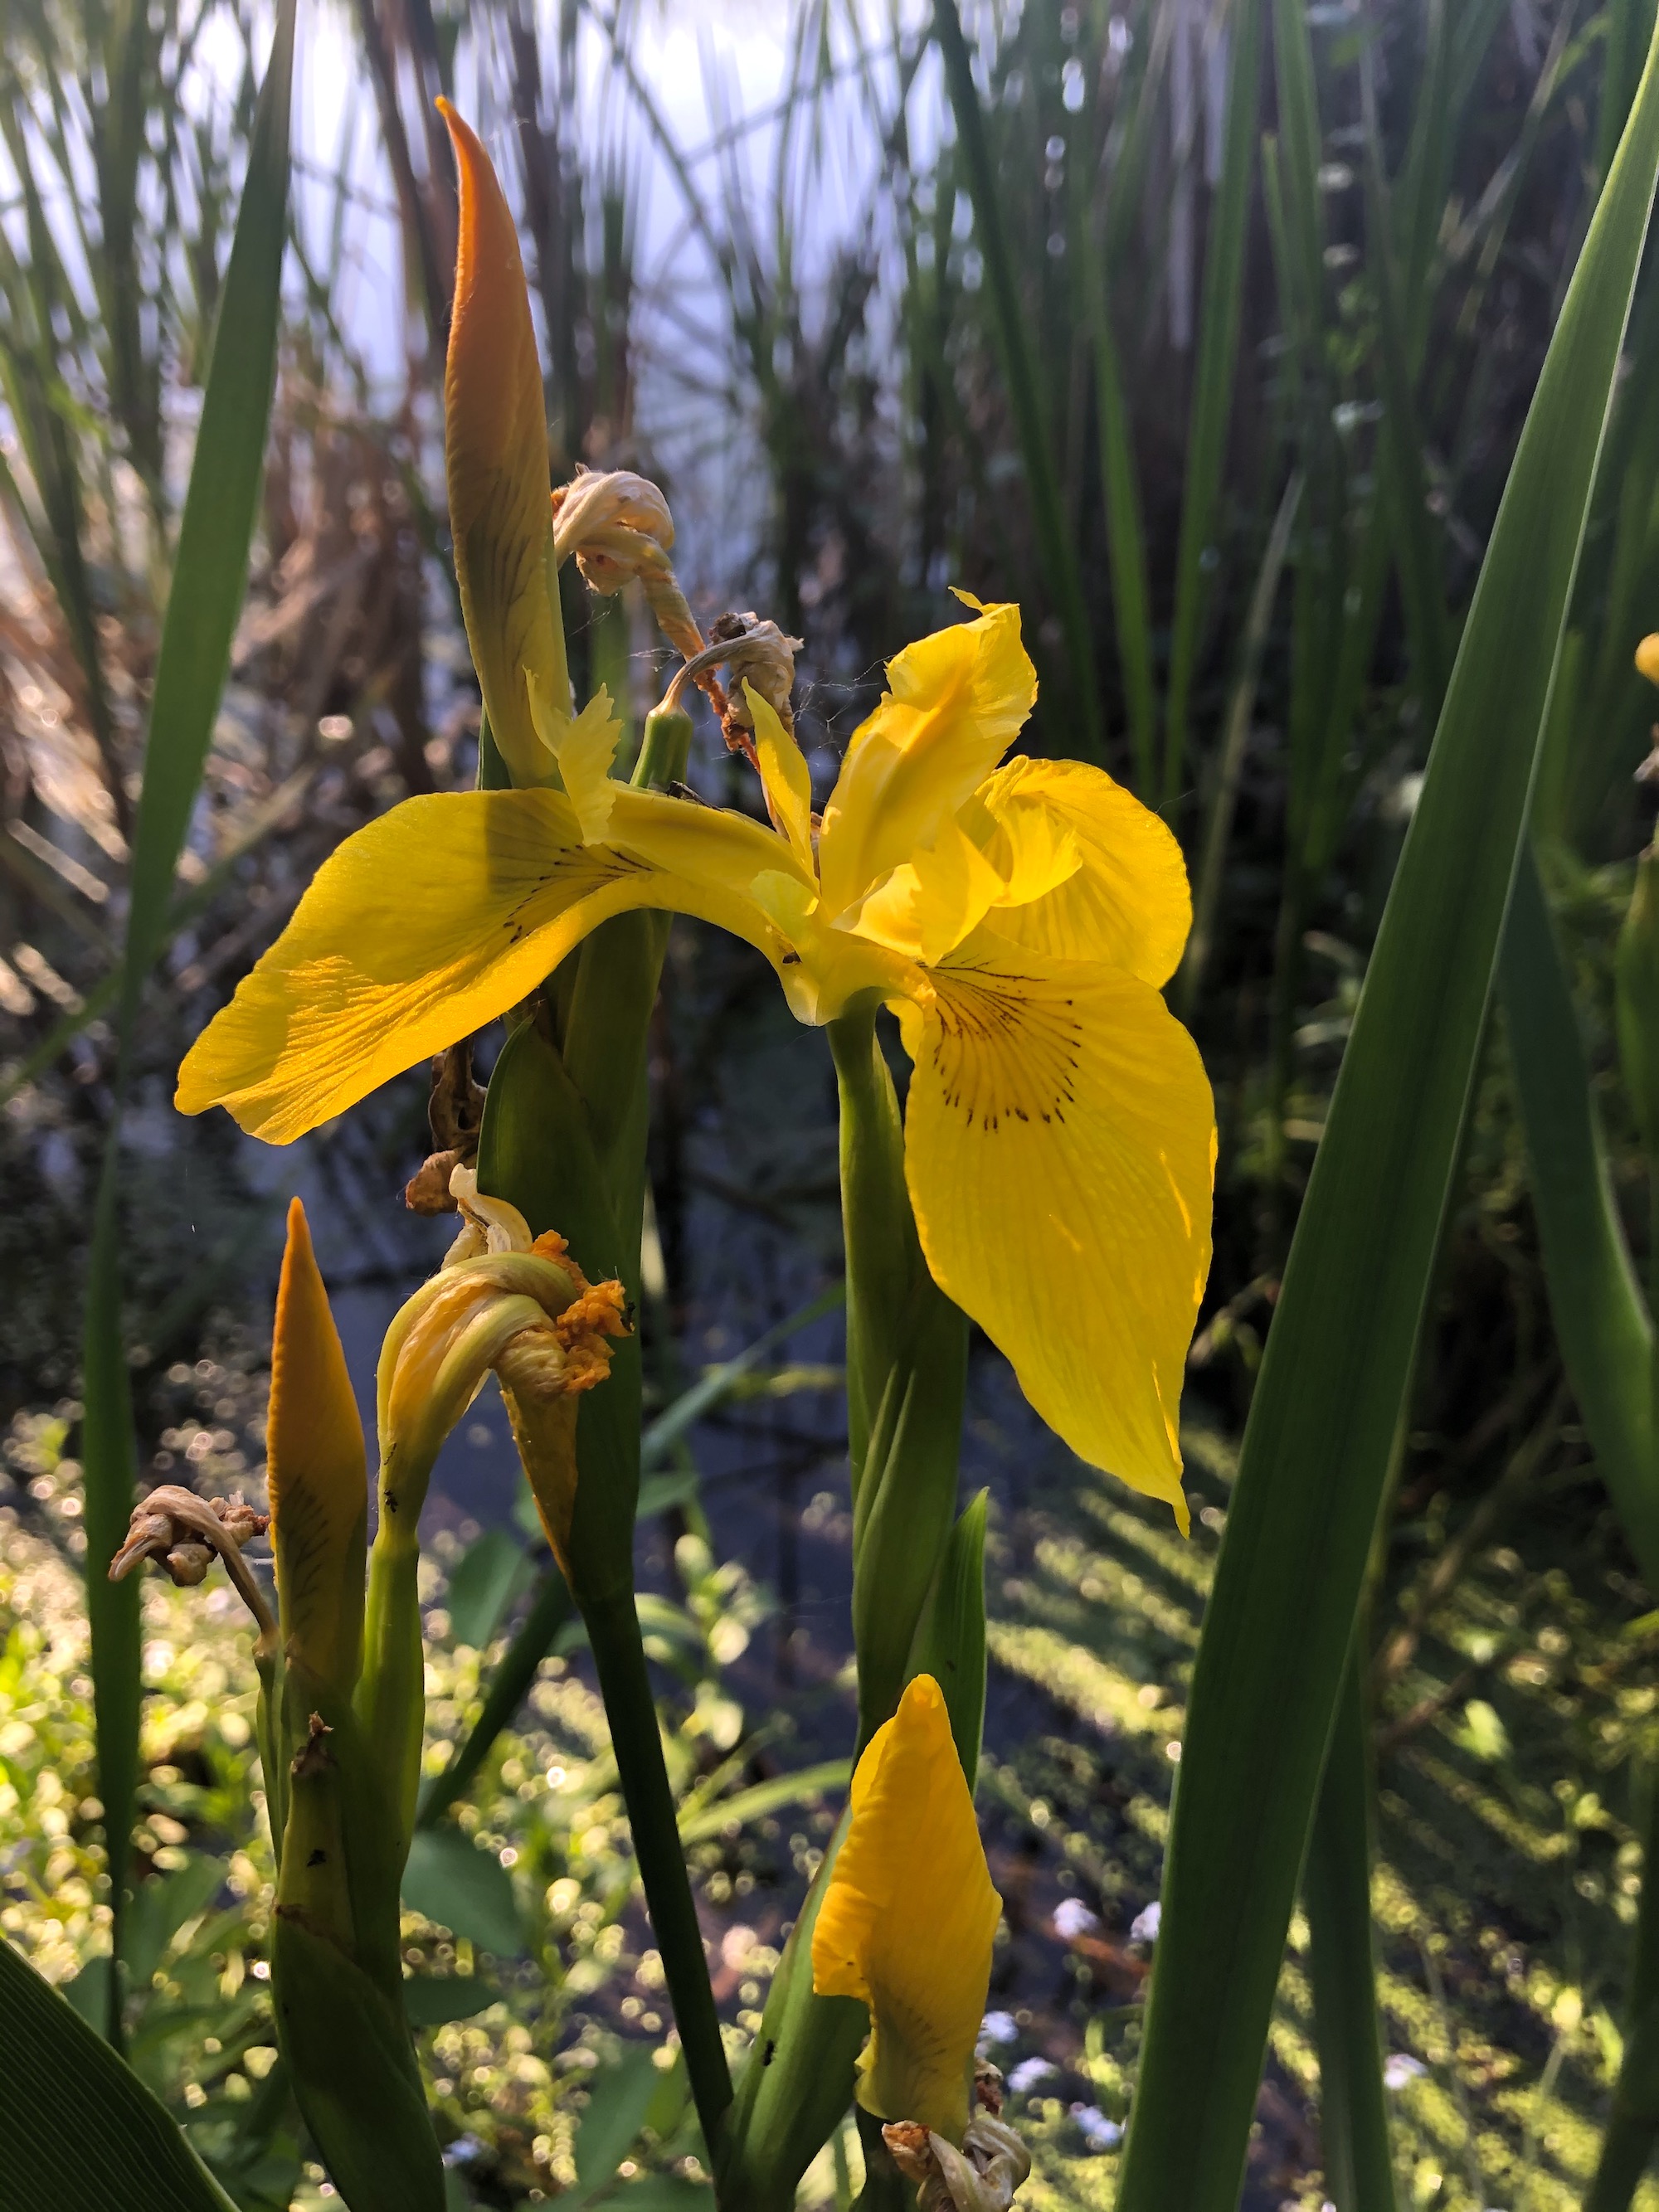 Yellow Flag Iris by Cattails on Lake Wingra on June 13, 2020.